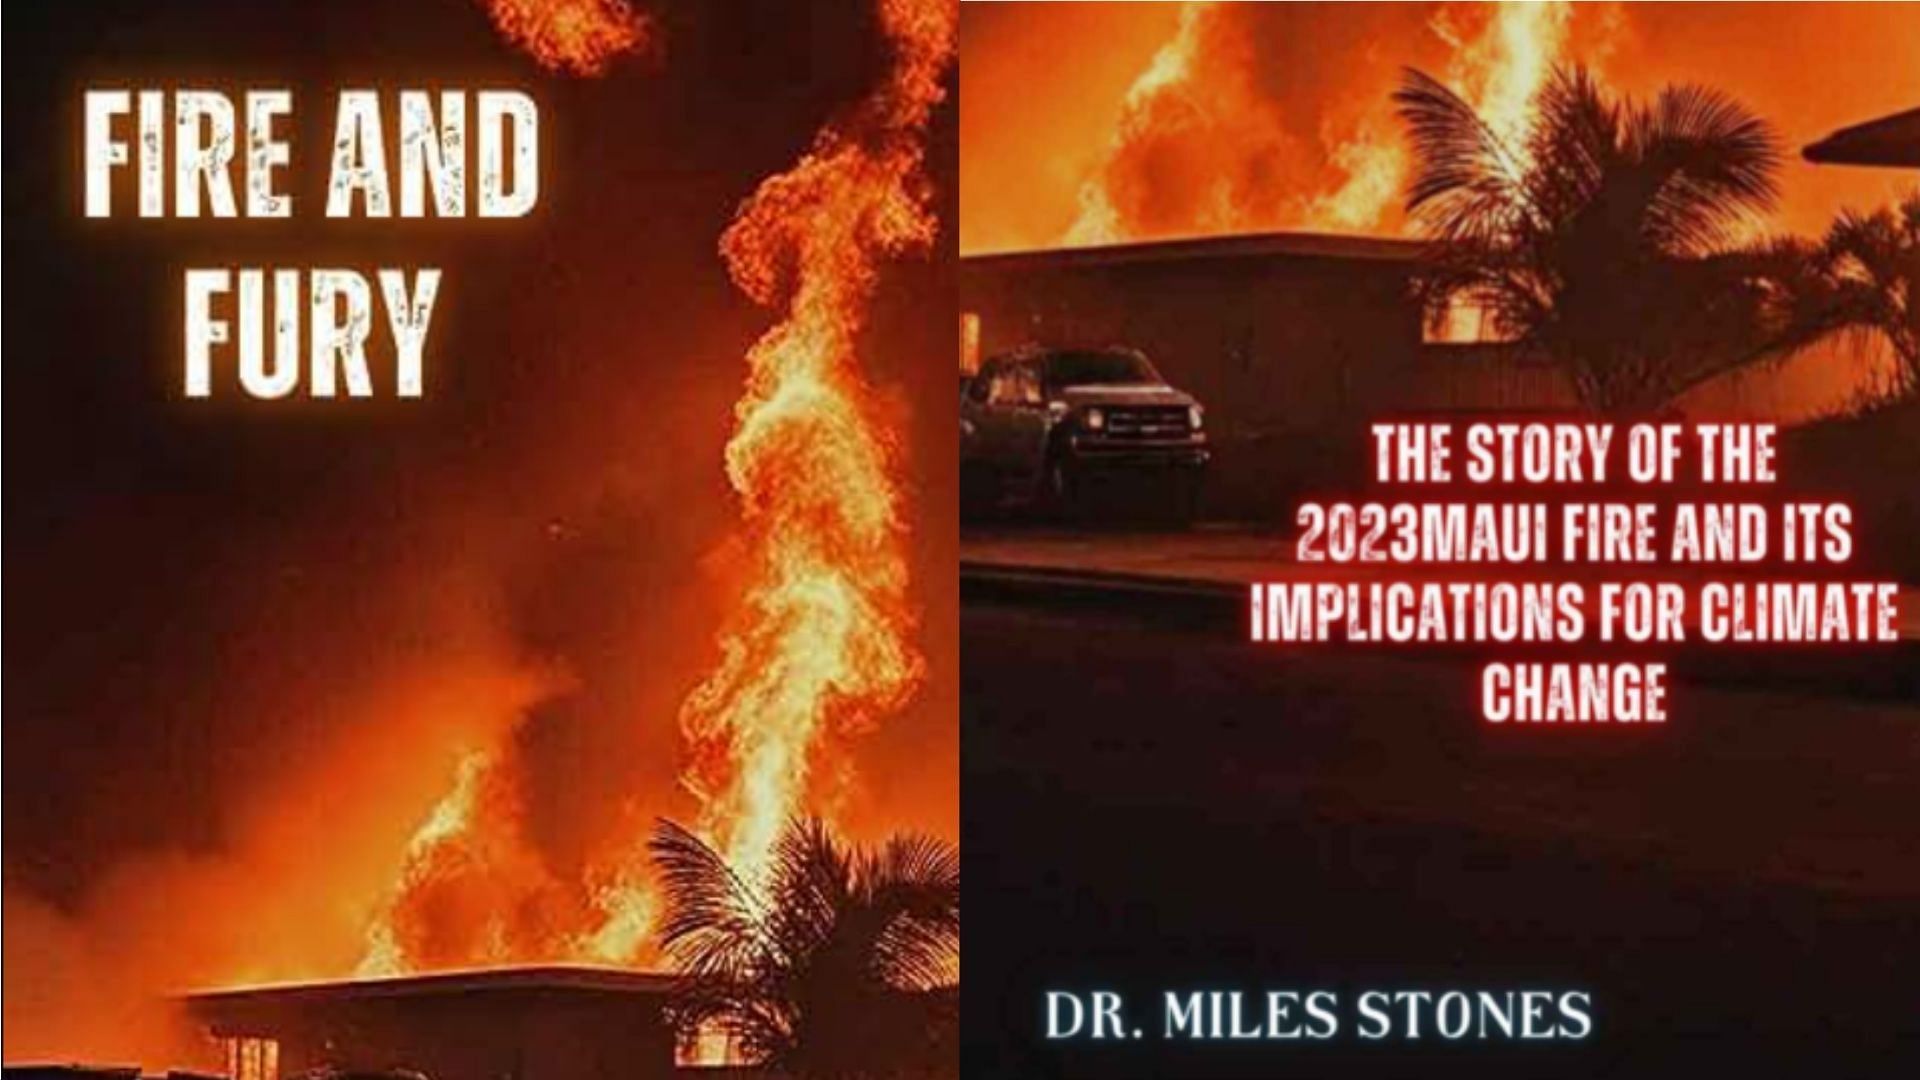 "Almost like they had a written script" Dr. Miles Stones’ Fire and